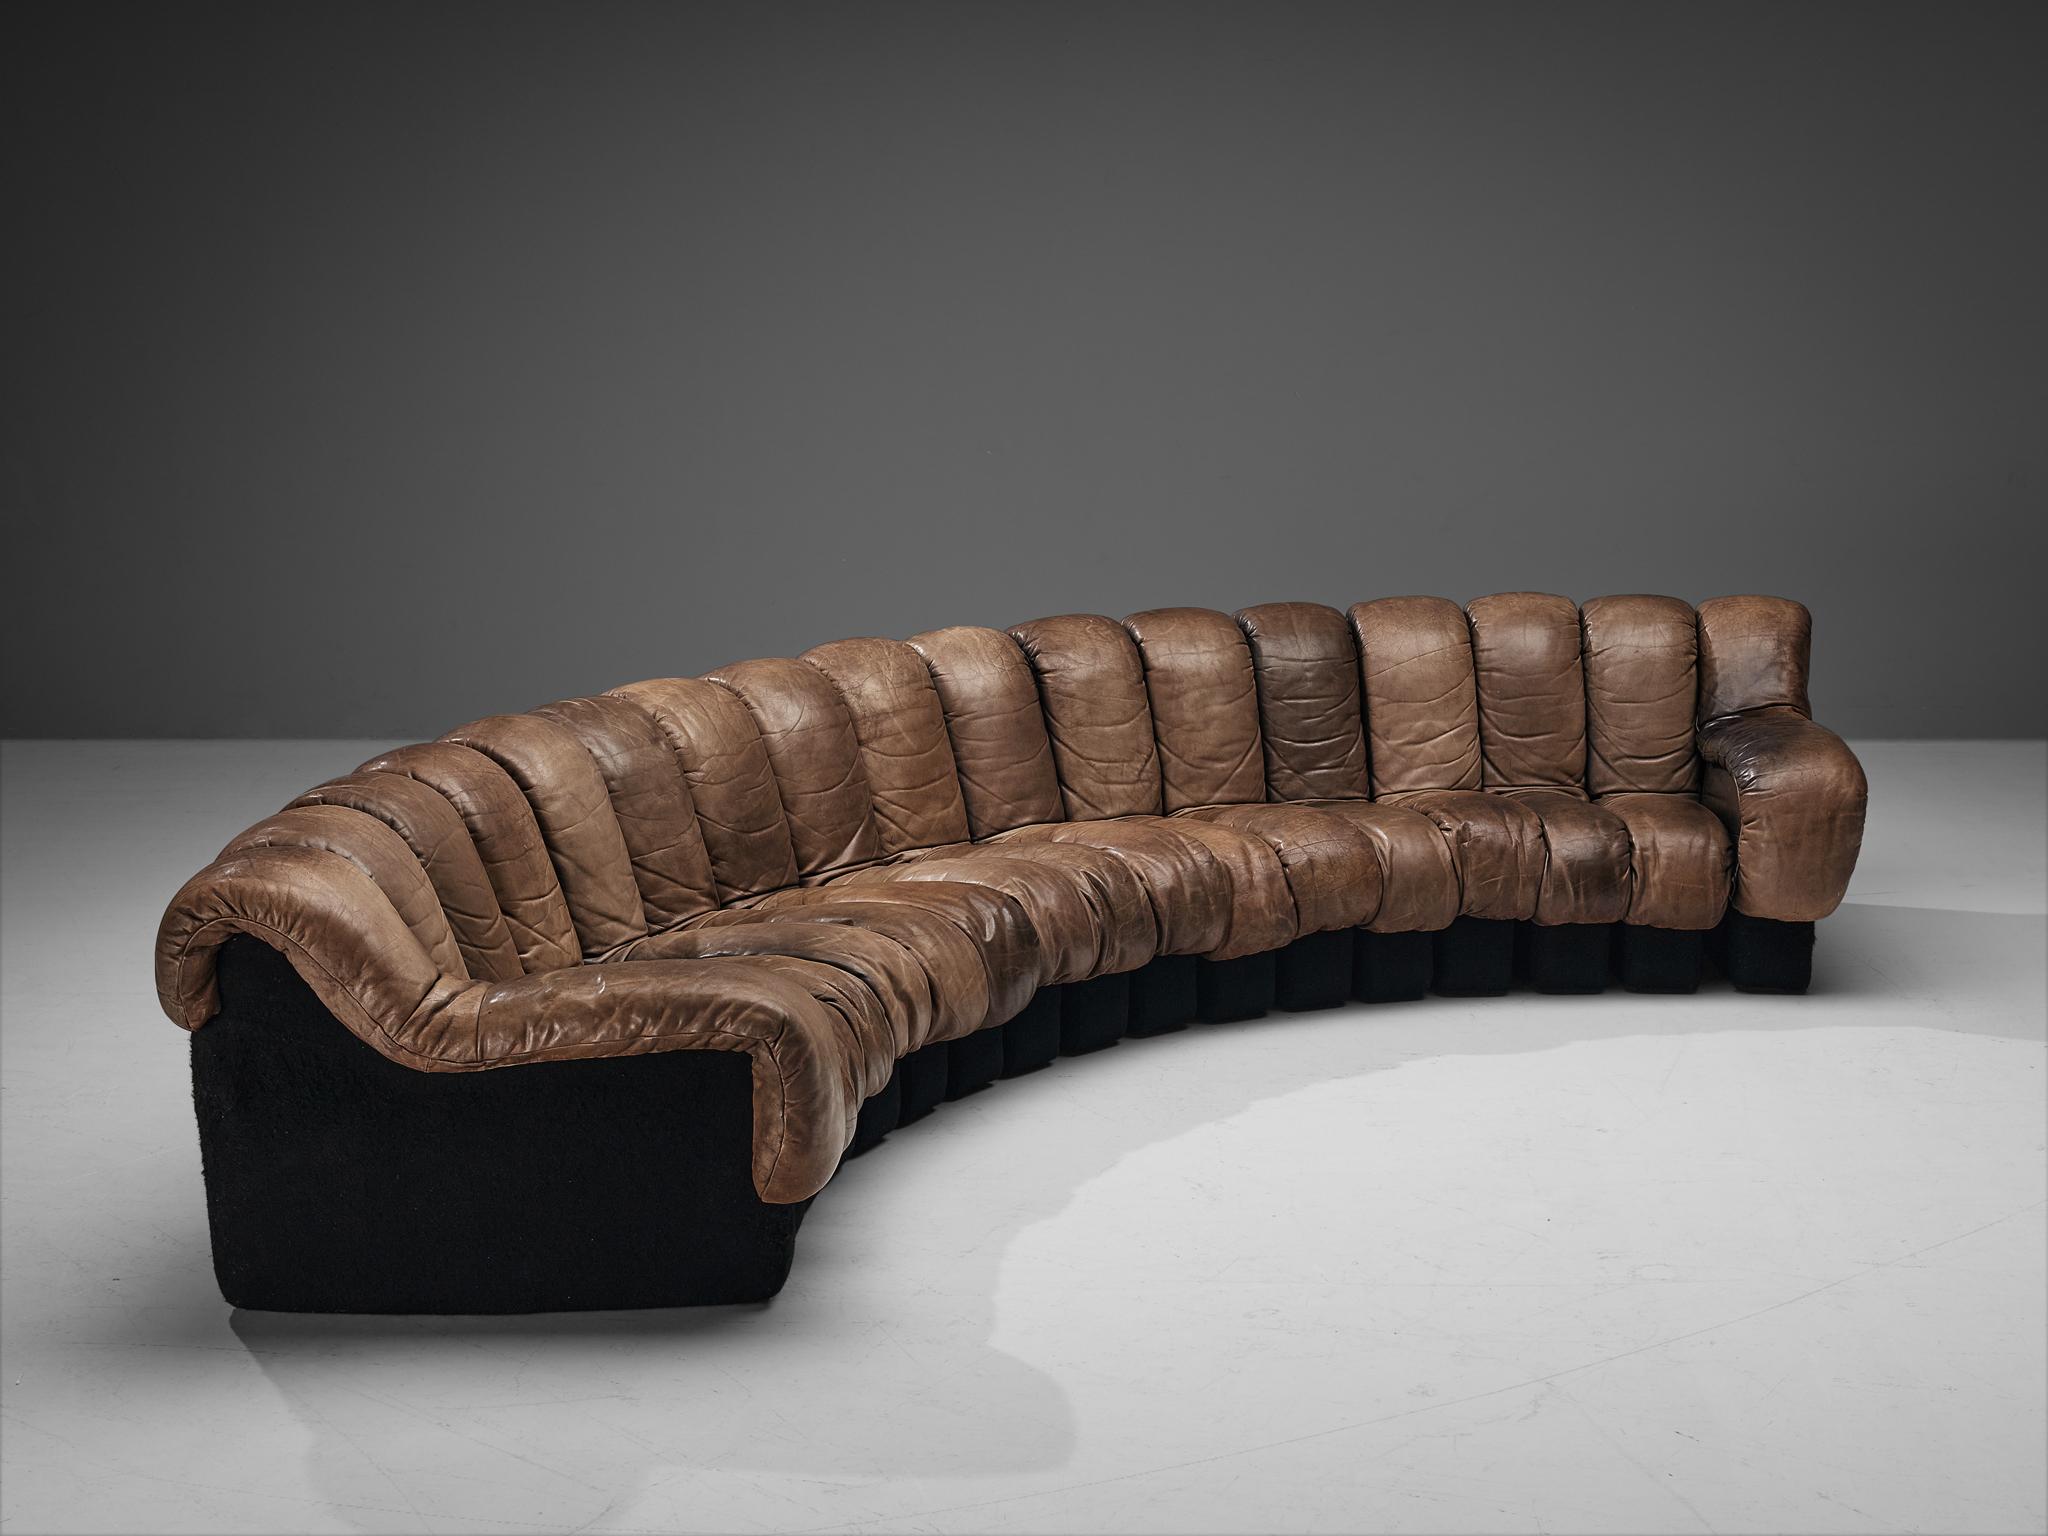 De Sede, ‘Snake’ DS-600, patinated leather, felt, Switzerland, 1972.

A design by Ueli Berger, Elenora Peduzzi-Riva, Heinz Ulrich and Klaus Vogt for De Sede, Switzerland. This De Sede modular 'Snake' sectional sofa contains seventeen pieces in